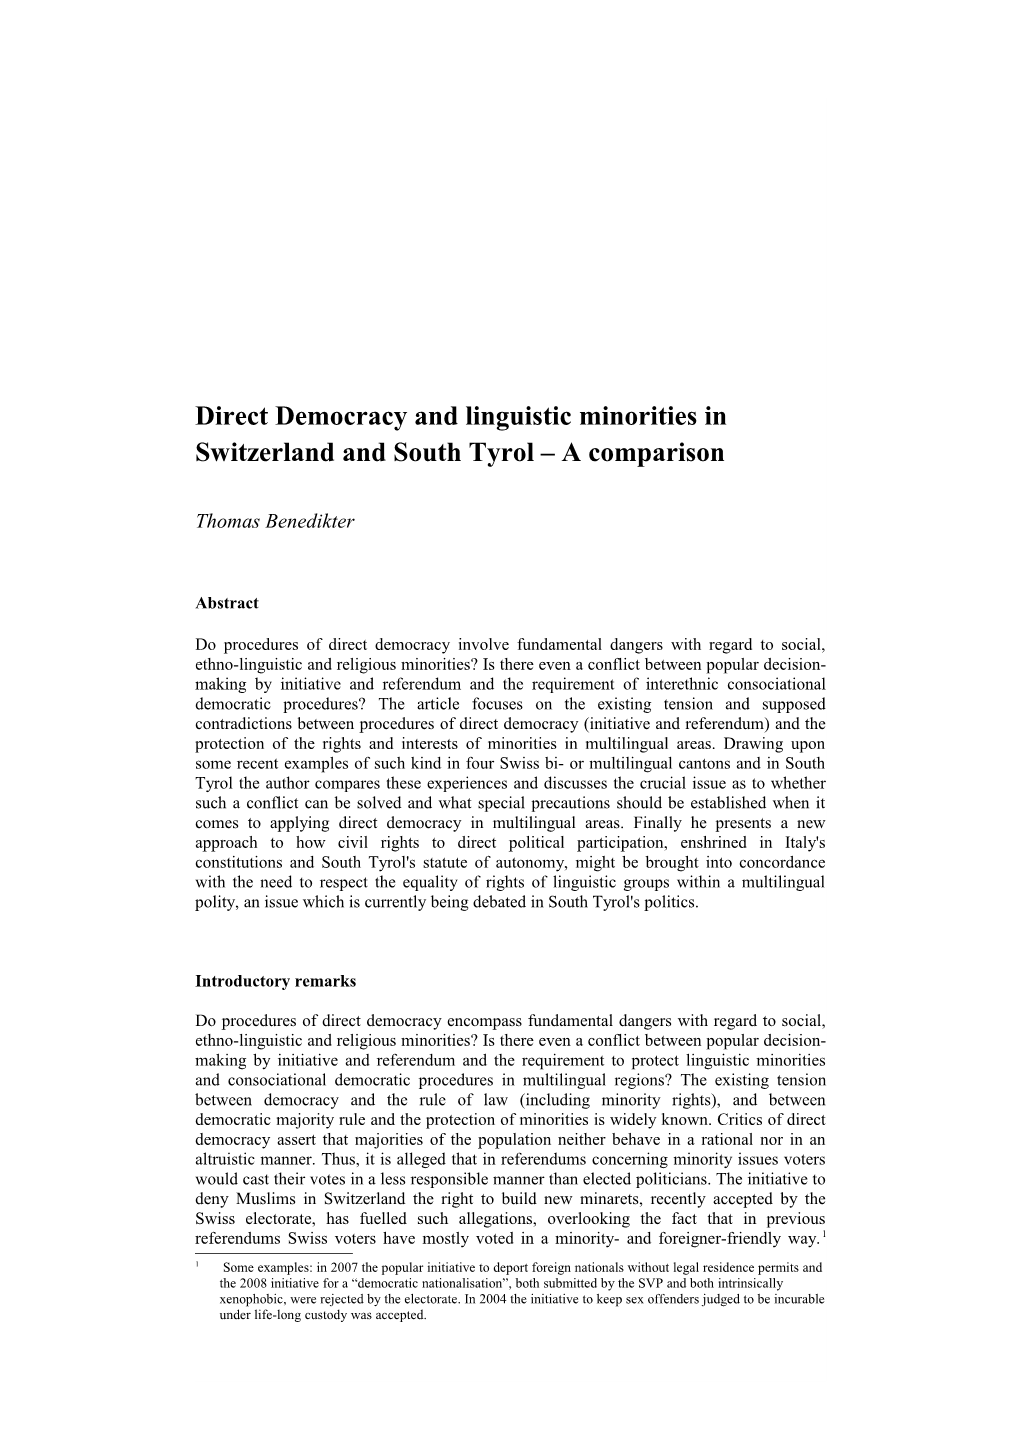 Direct Democracy and Linguistic Minorities in Switzerland and South Tyrol a Comparison